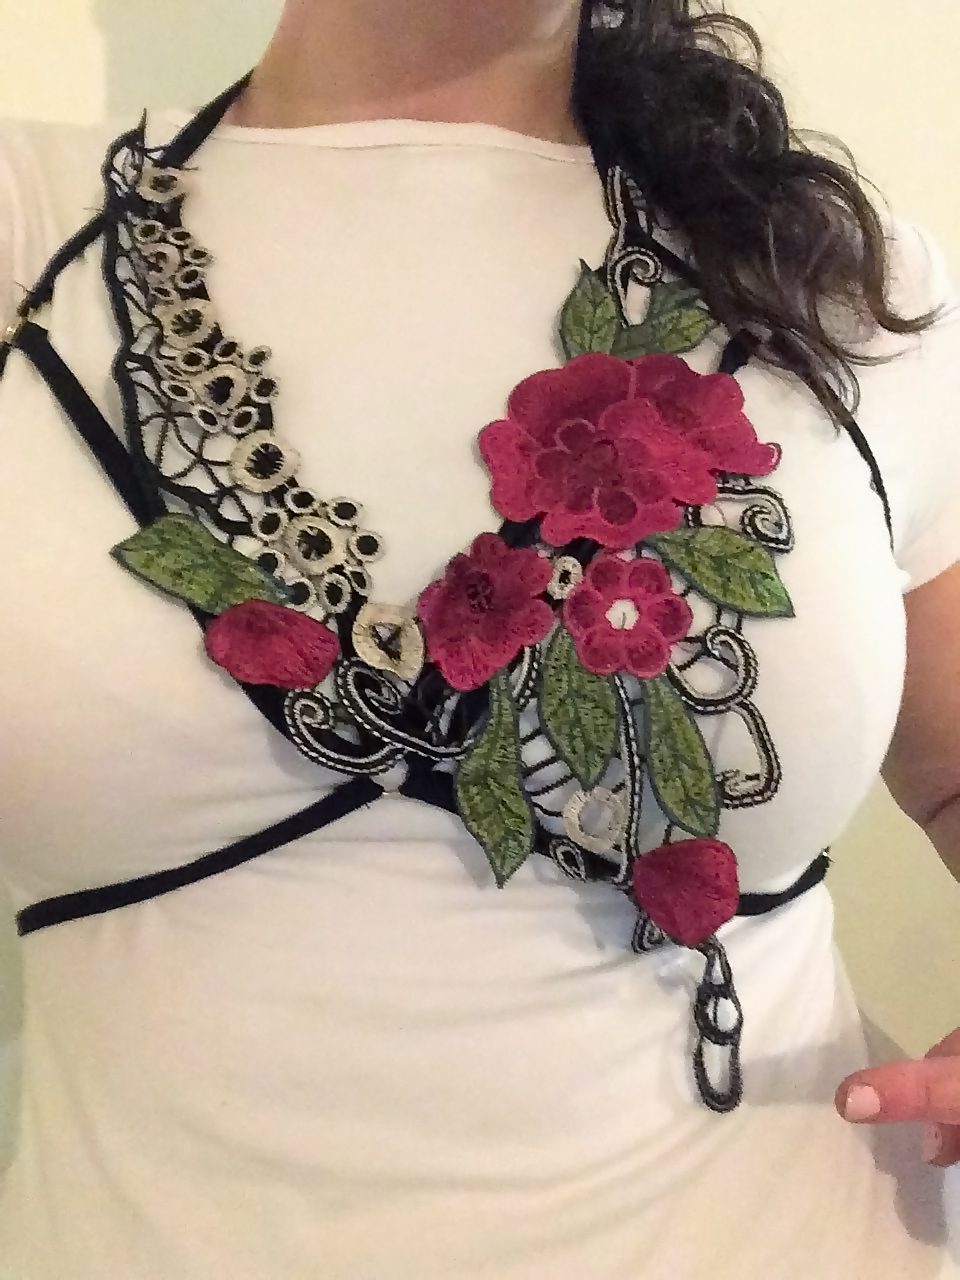 Lingerie Review: Liquid Red Design Fanciful Floral Cage Harness